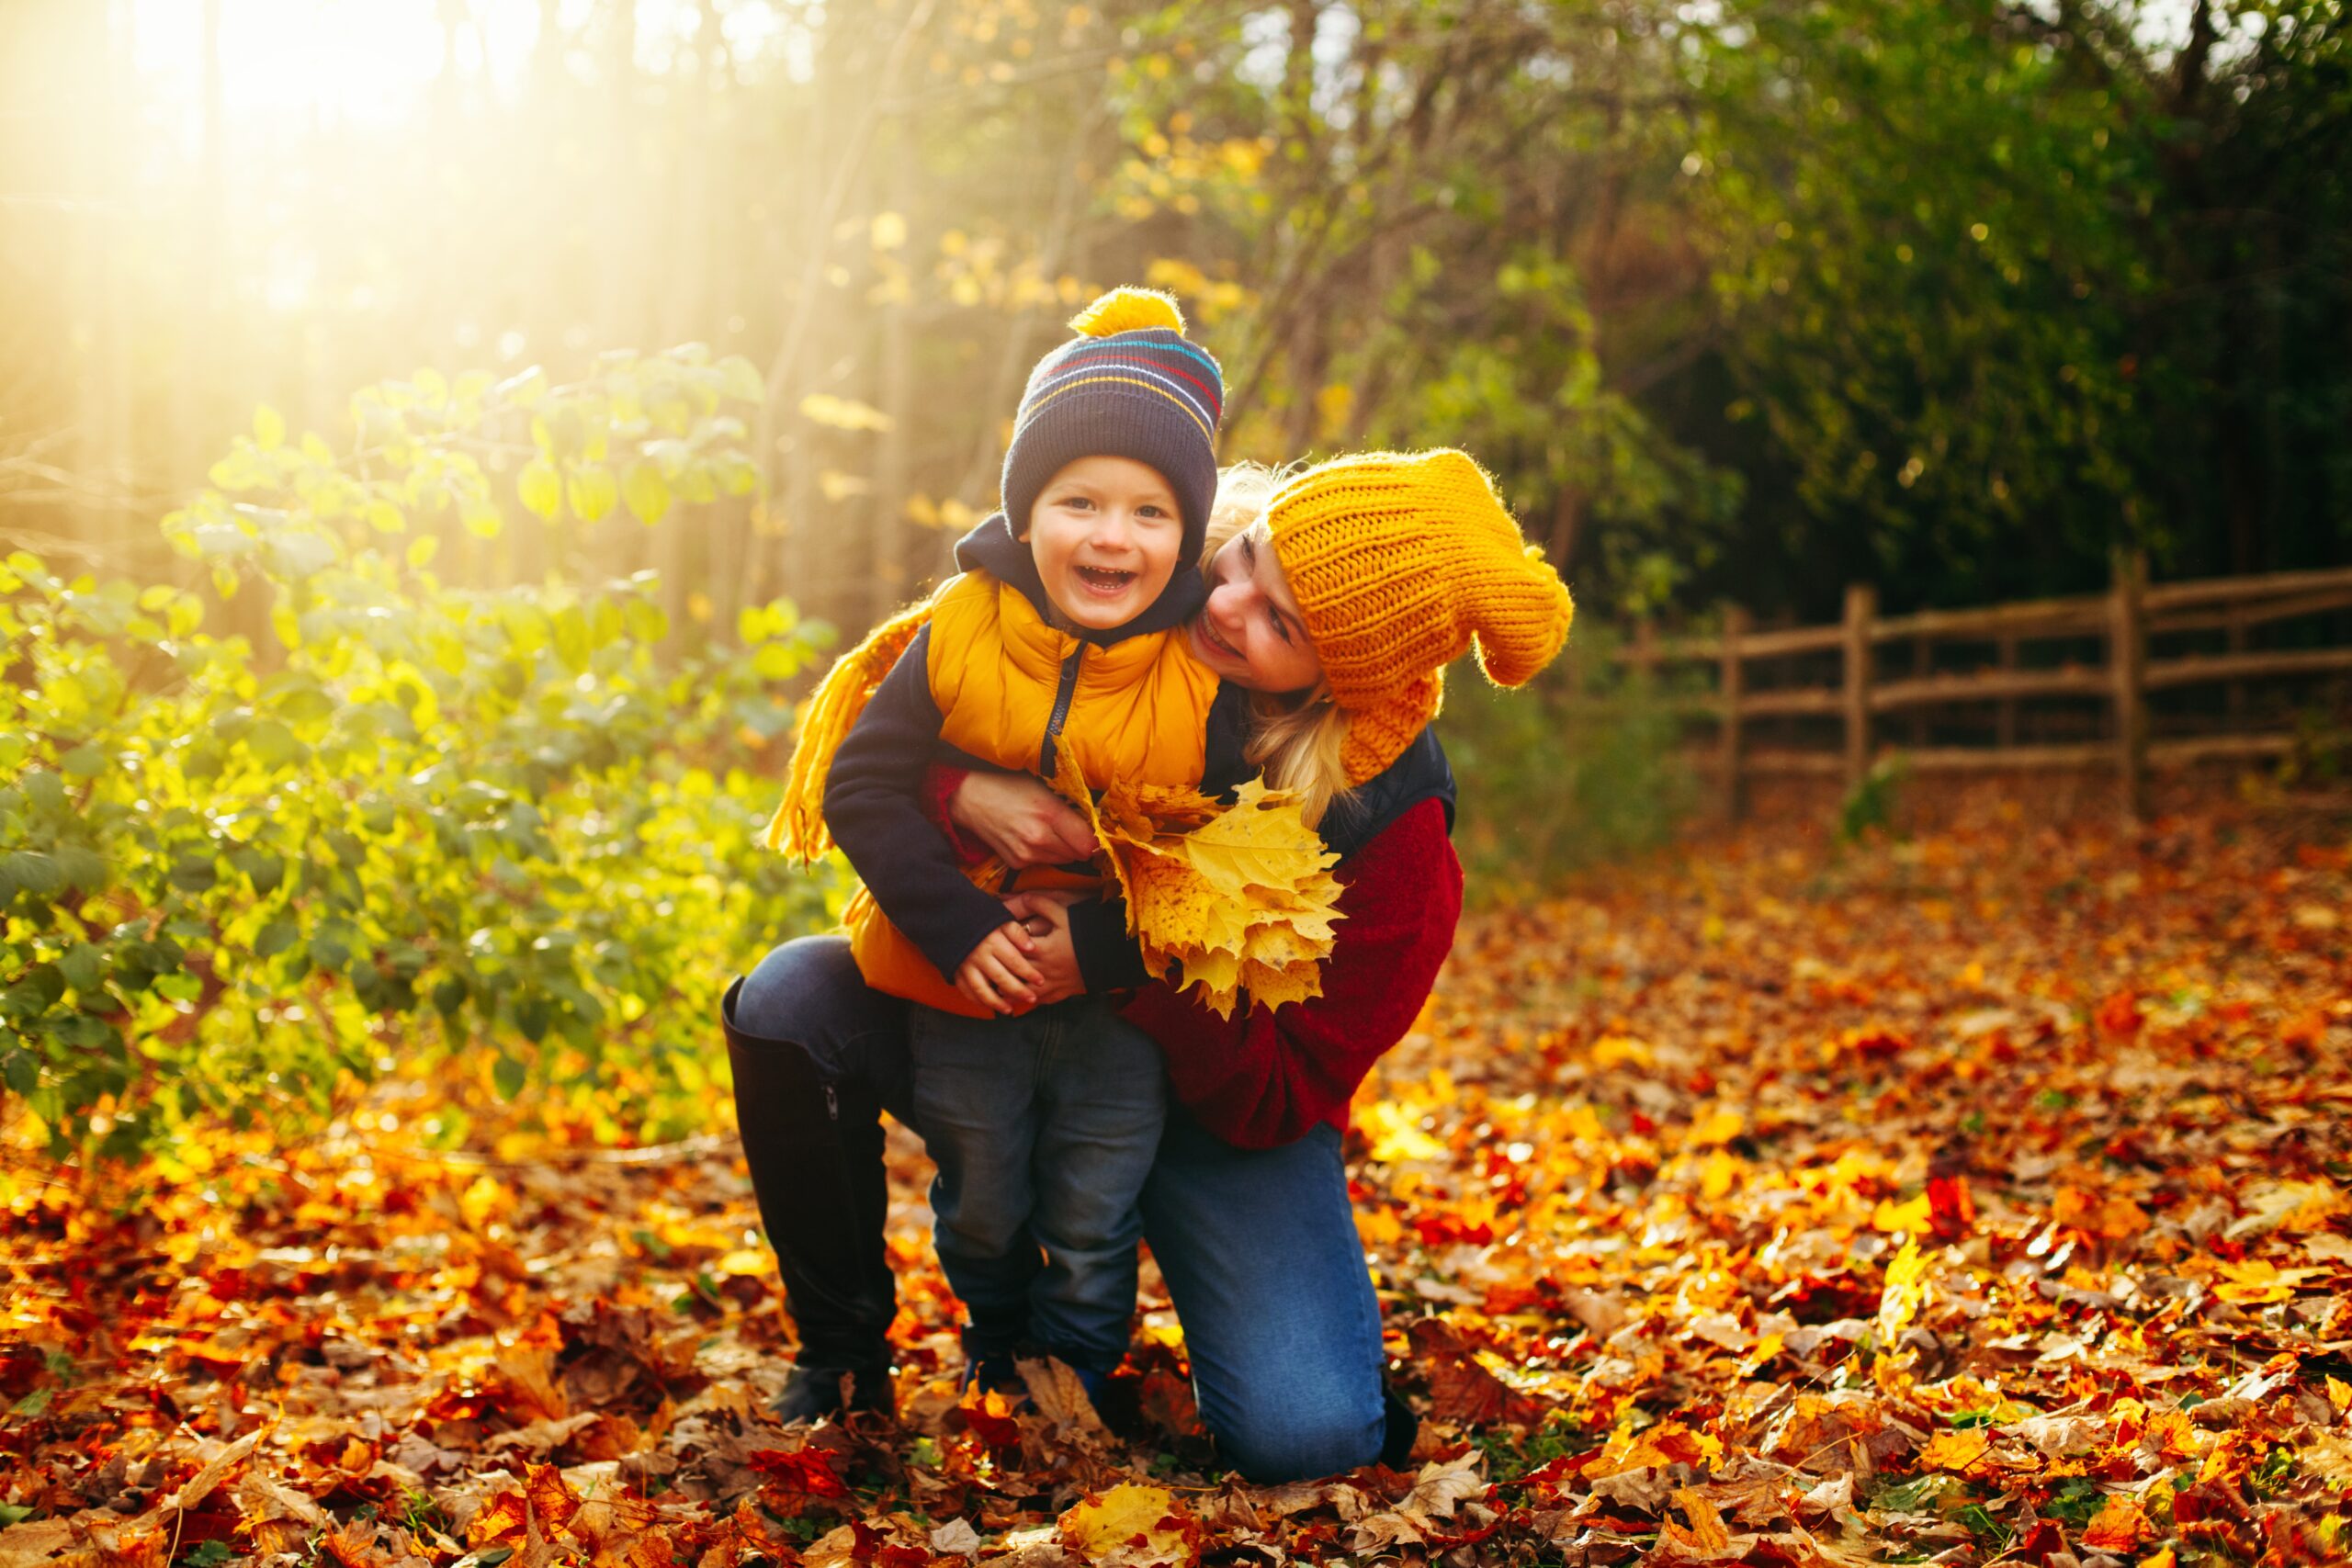 Activities for kids during Thanksgiving